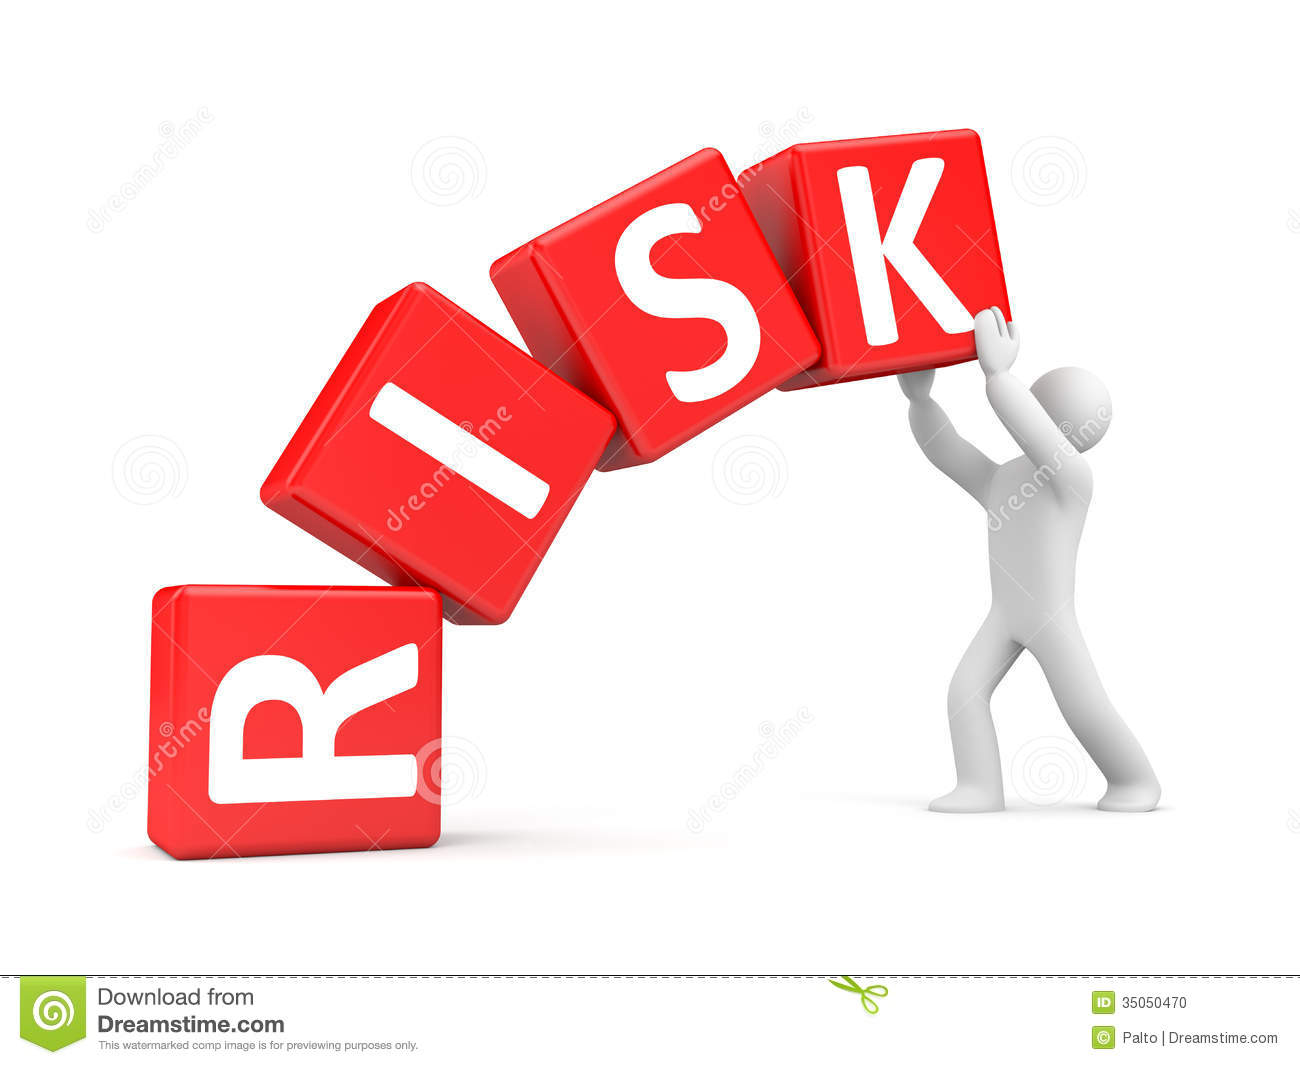 People With Risk Cubes Stock Photo   Image  35050470